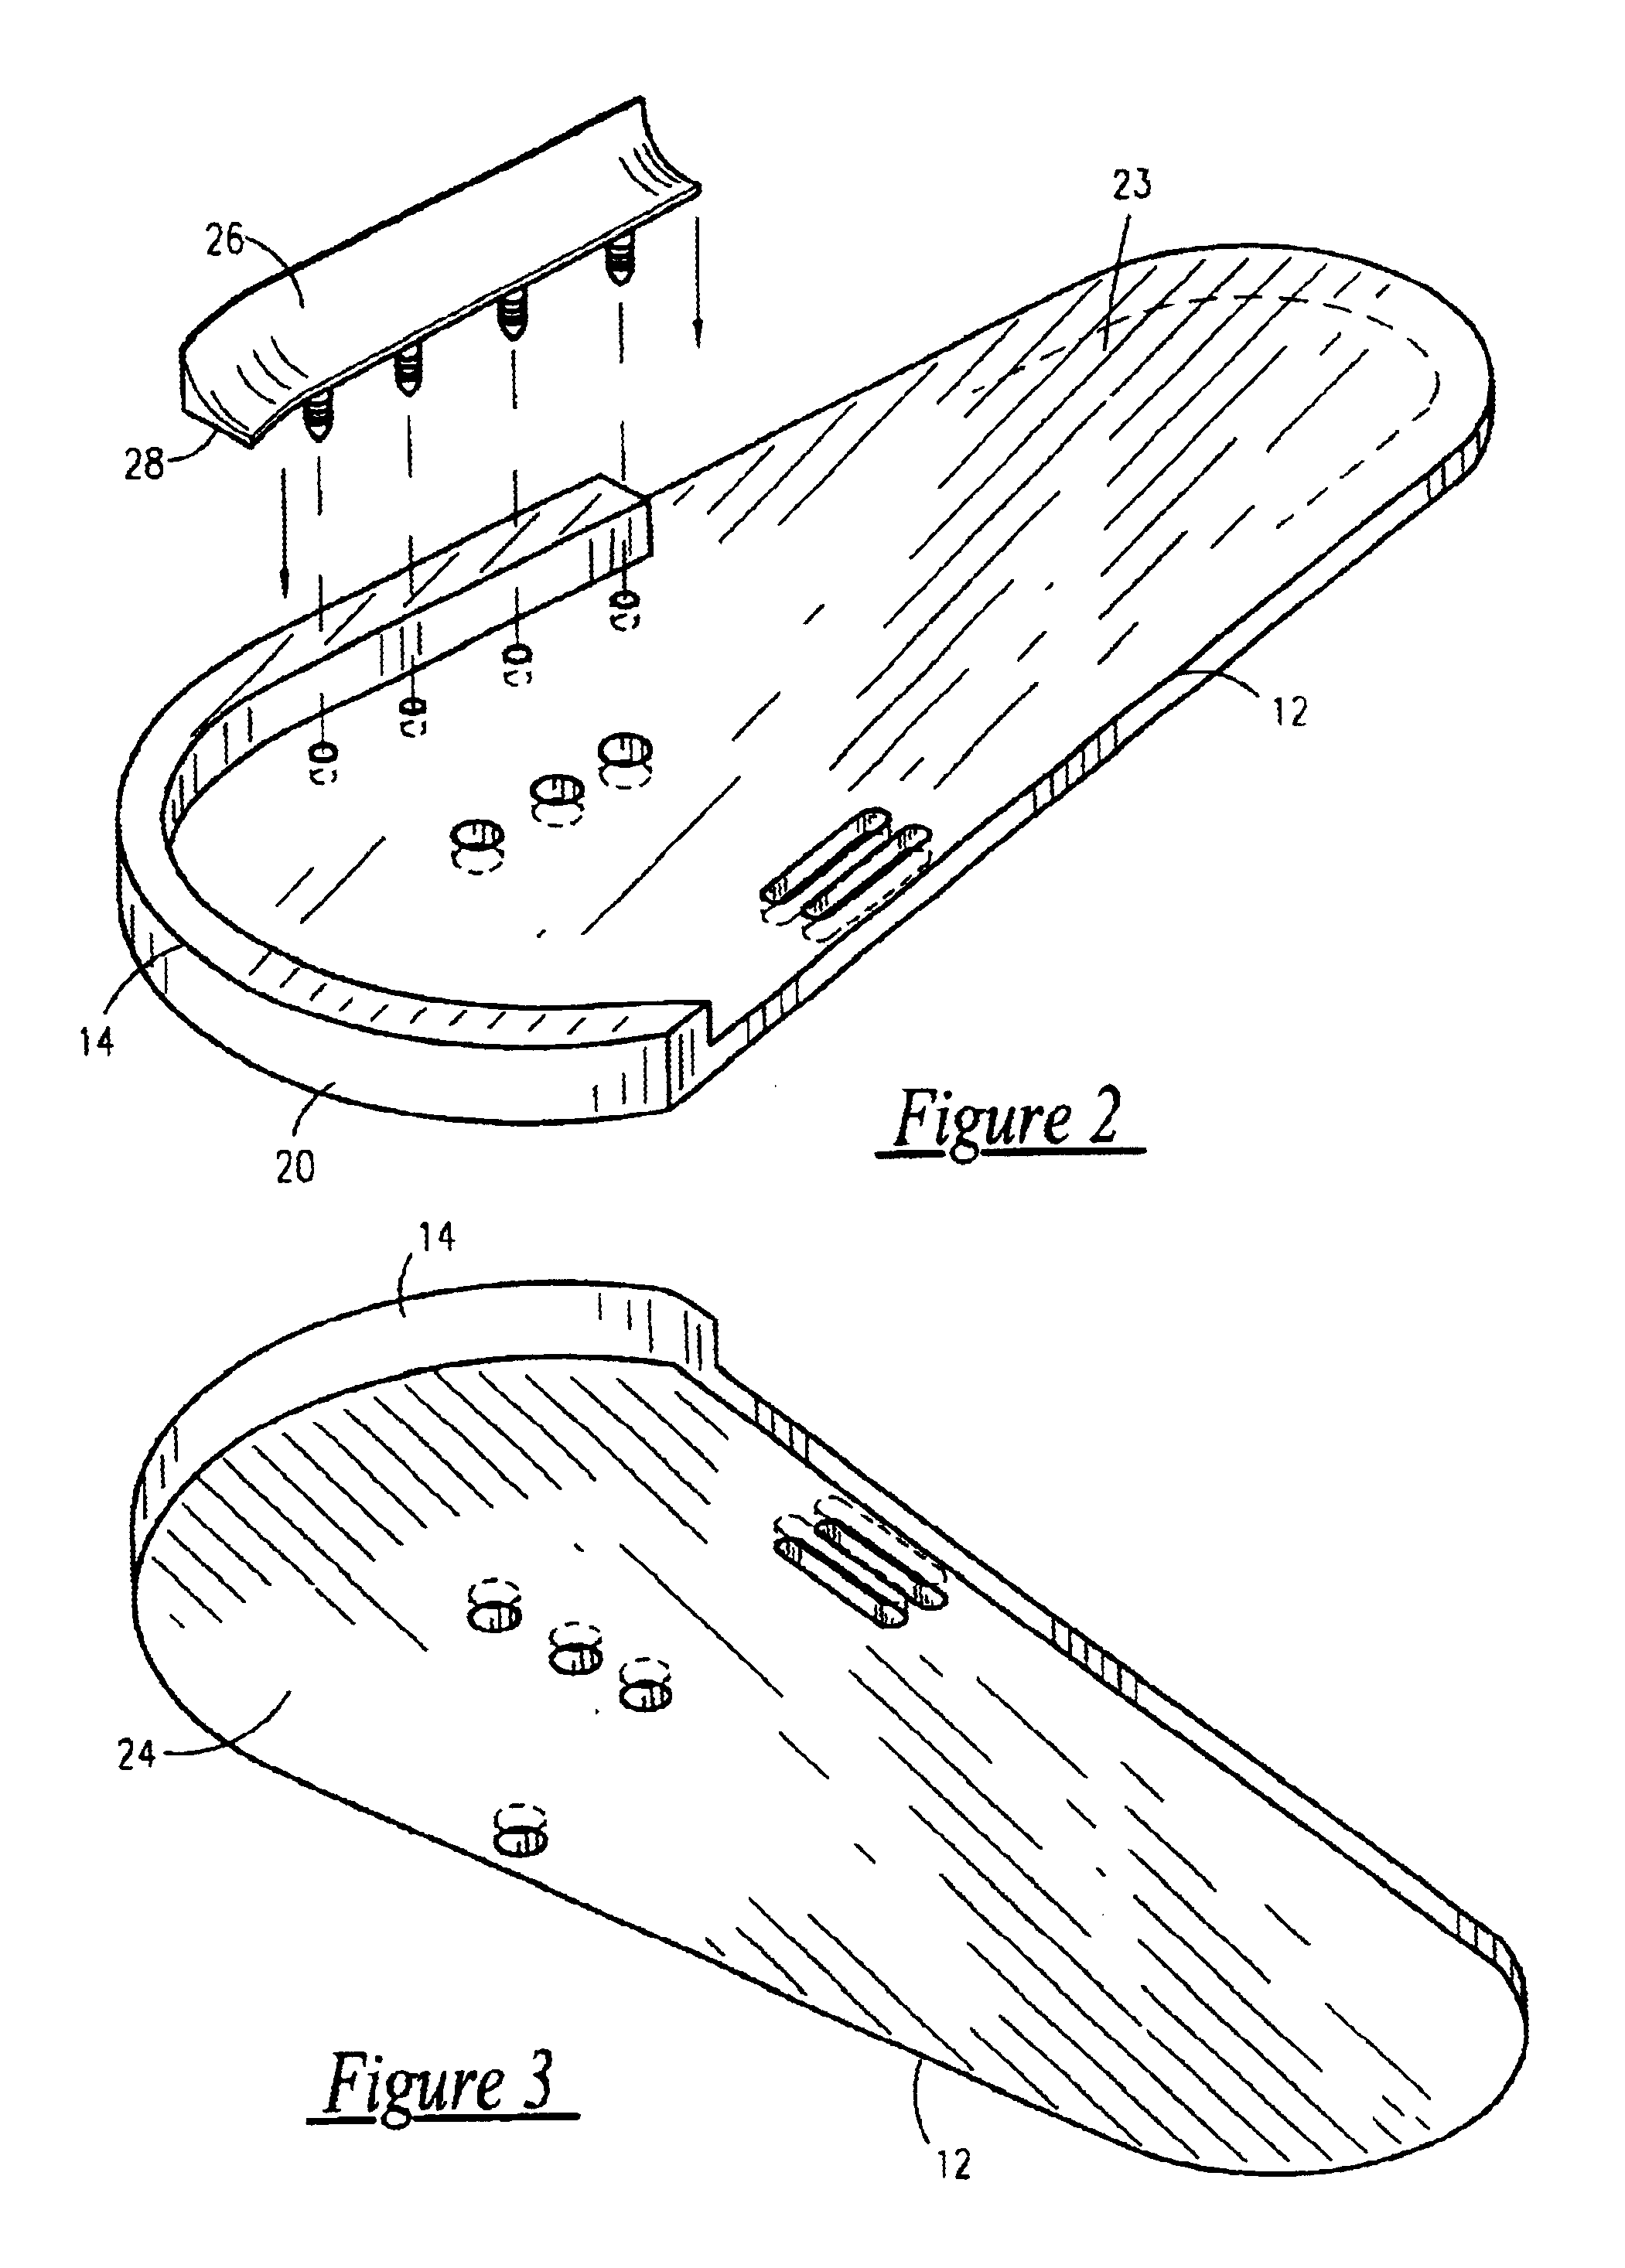 Sports stance and follow-through training apparatus